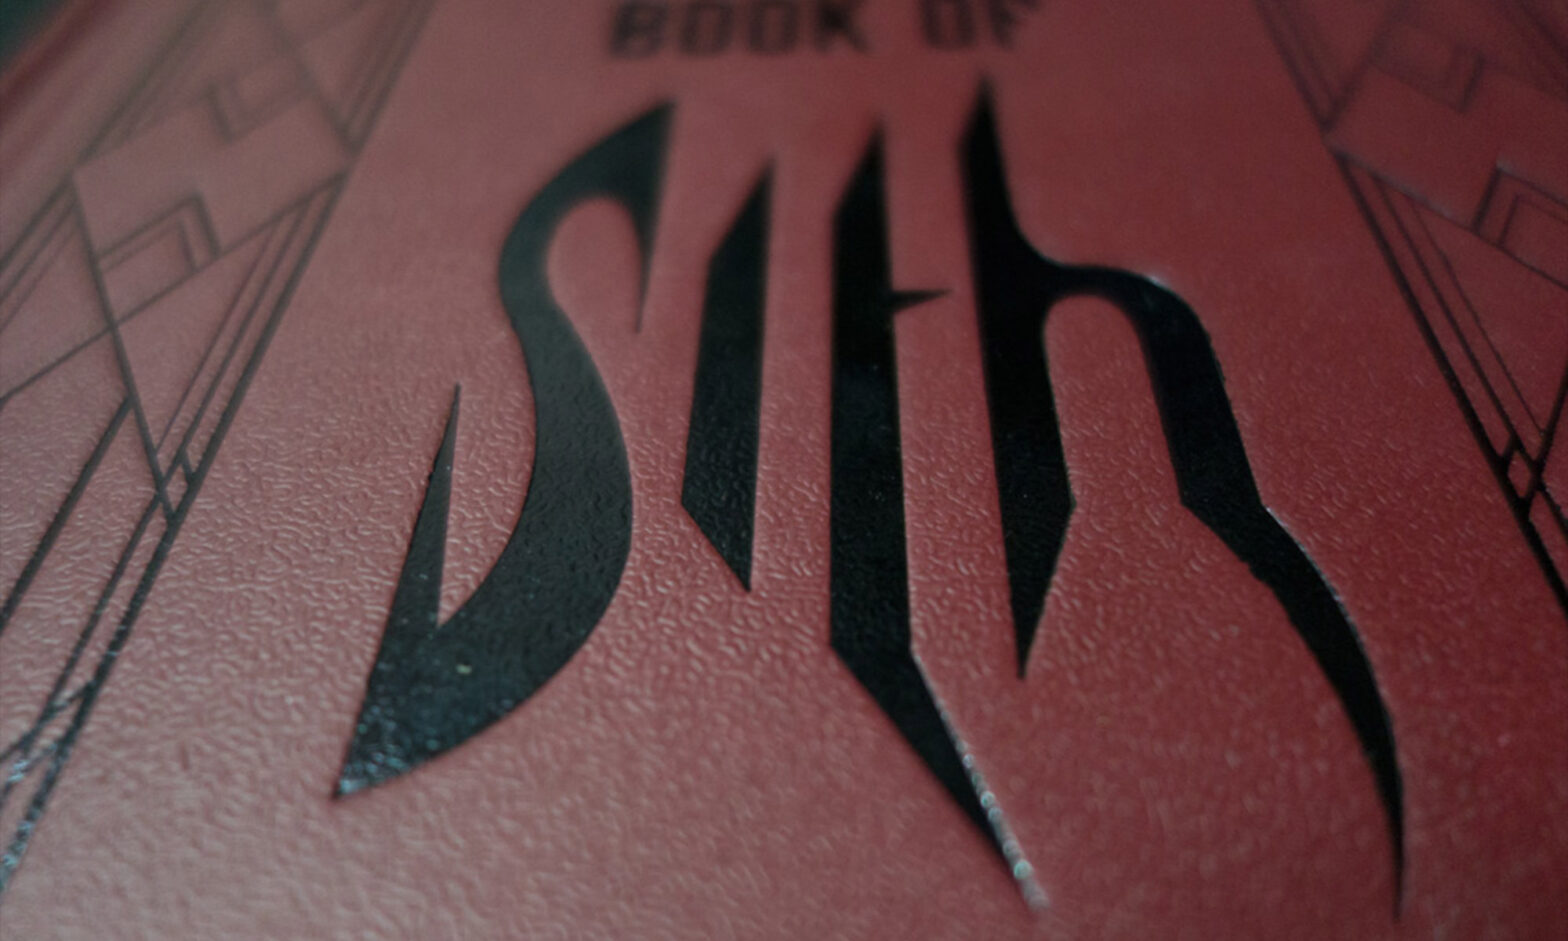 Book of Sith